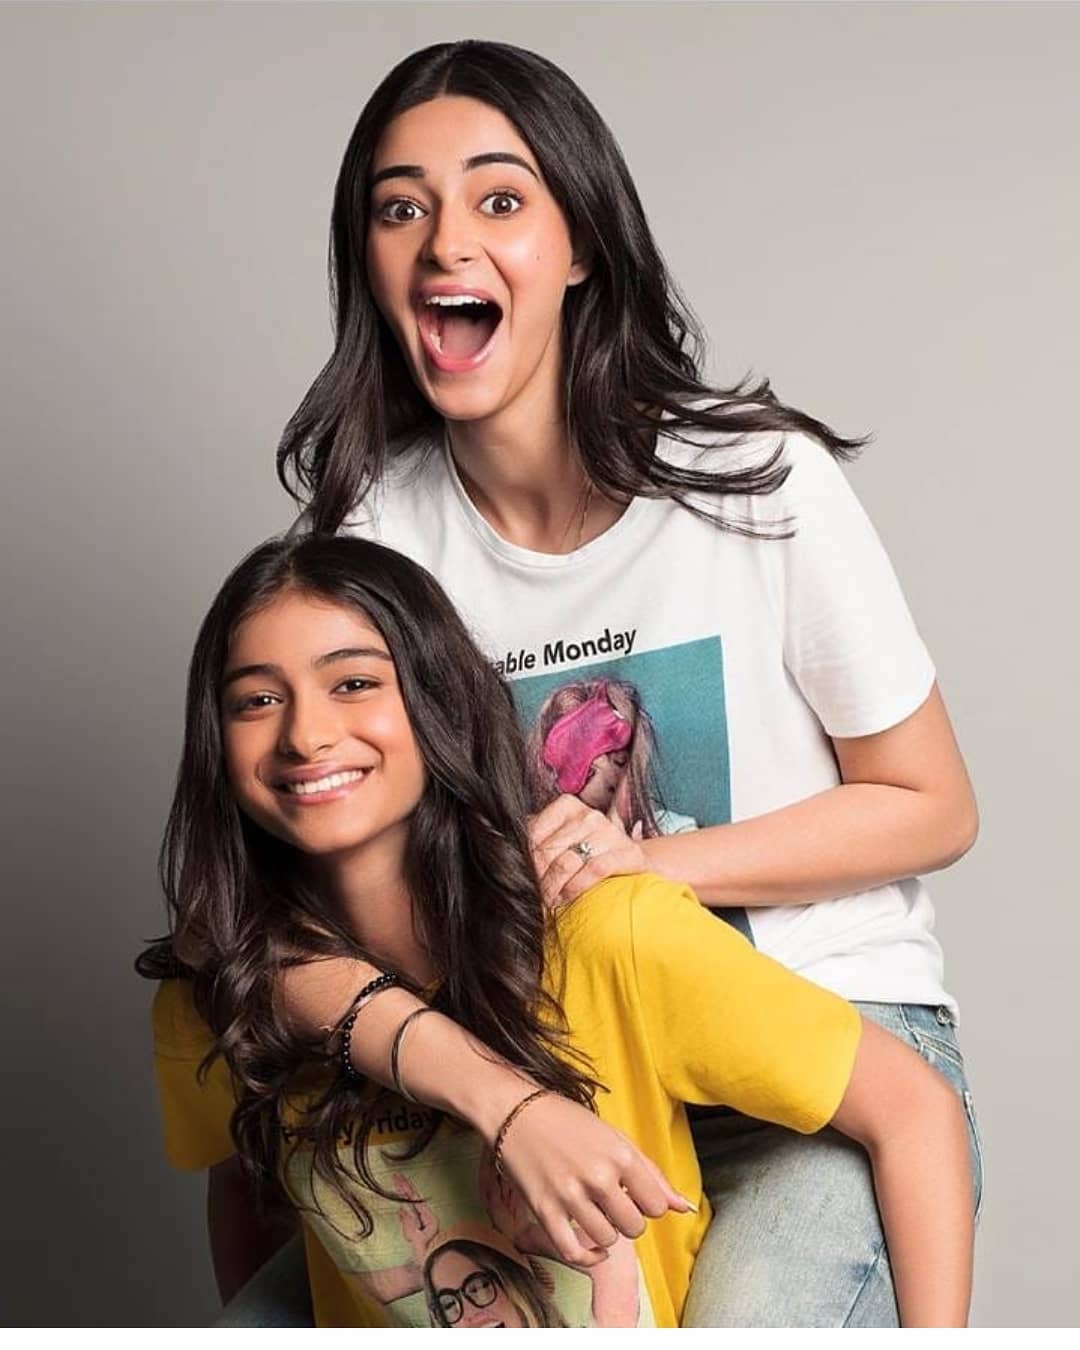 Ananya and Rysa Panday, the Bollywood duo with serious star power. Ananya, the older sis, is a natural when it comes to acting – she's been wowing audiences since her debut. Her energy and killer screen presence have earned her a special spot in the industry. Rysa, the younger one is taking her time to shine, but you can feel the potential, and fans are super excited for her journey. 